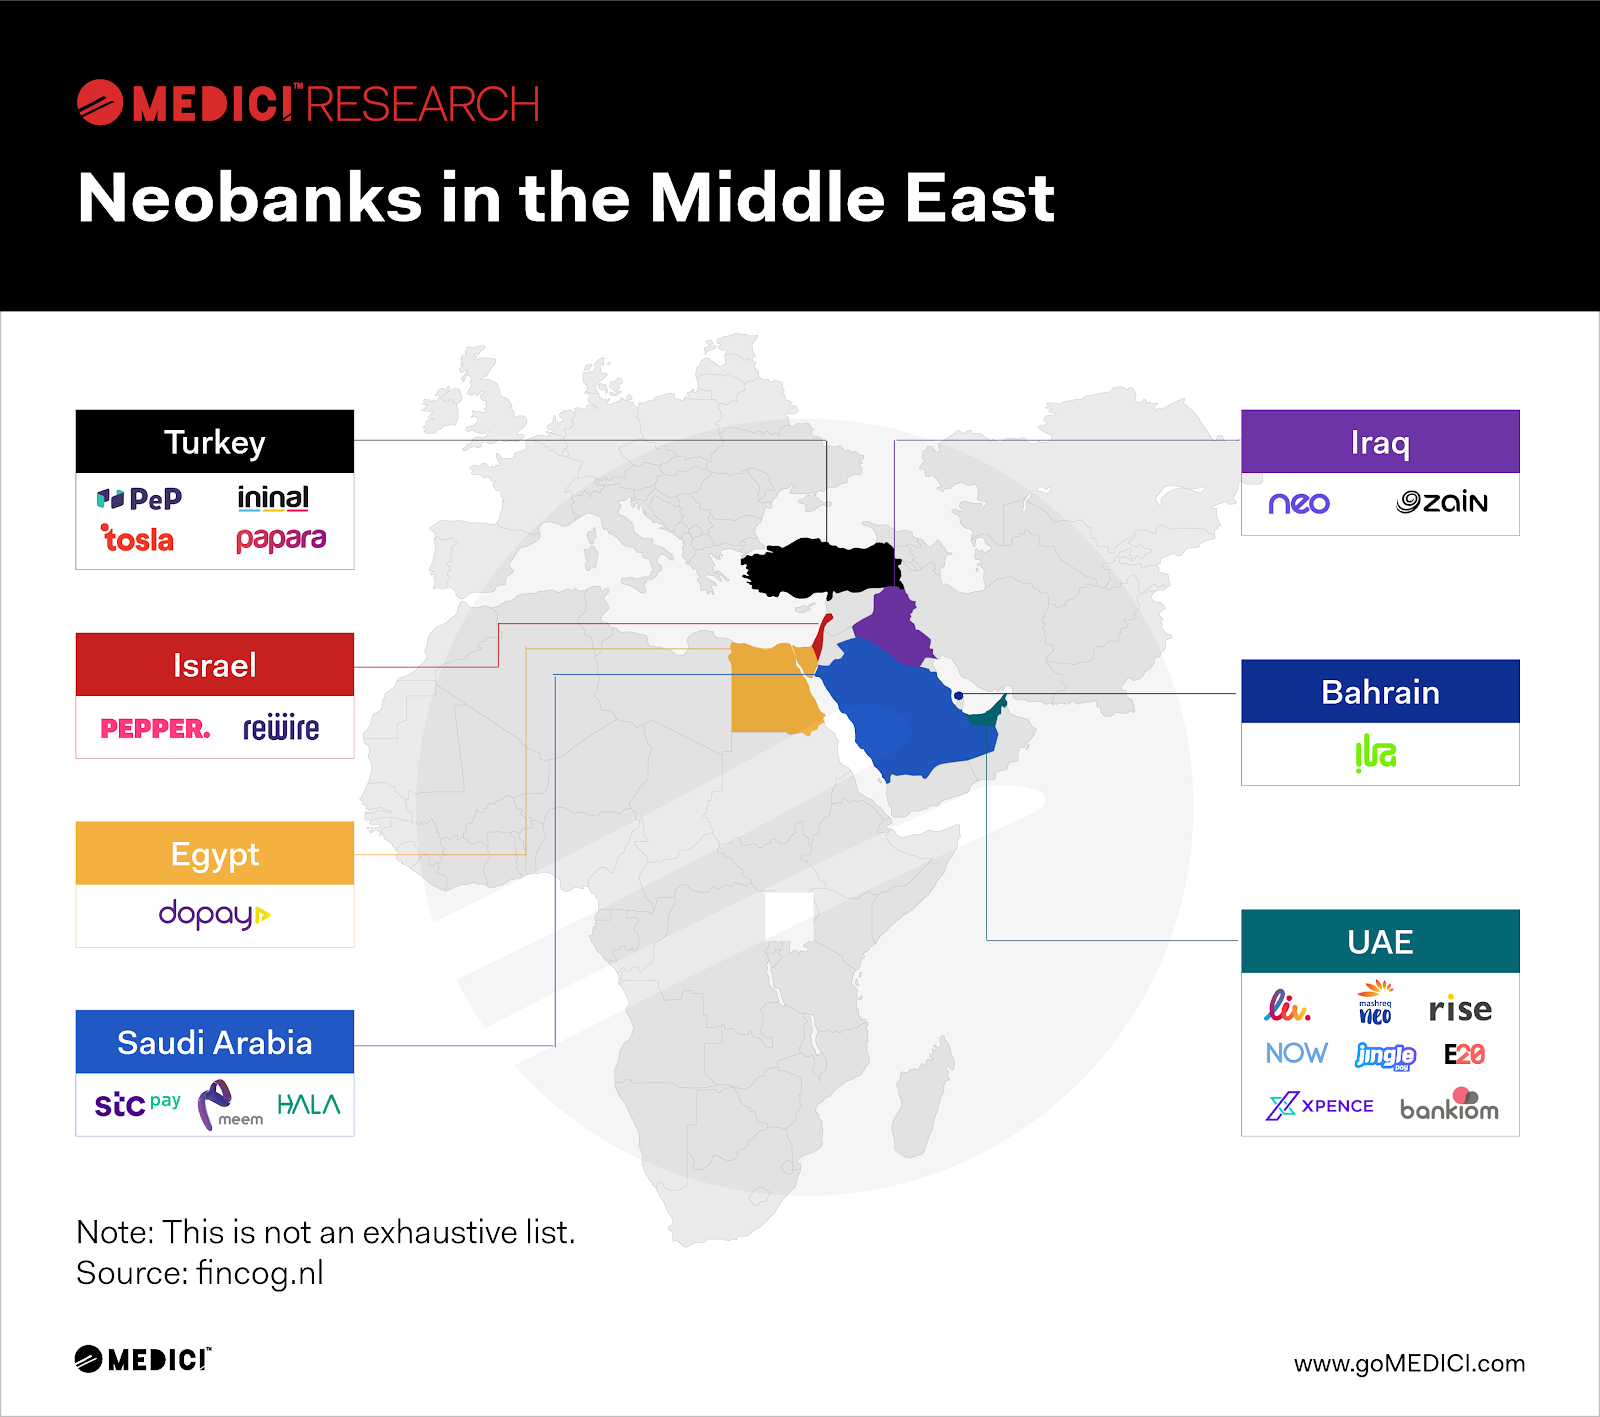 Neobanks in the Middle East